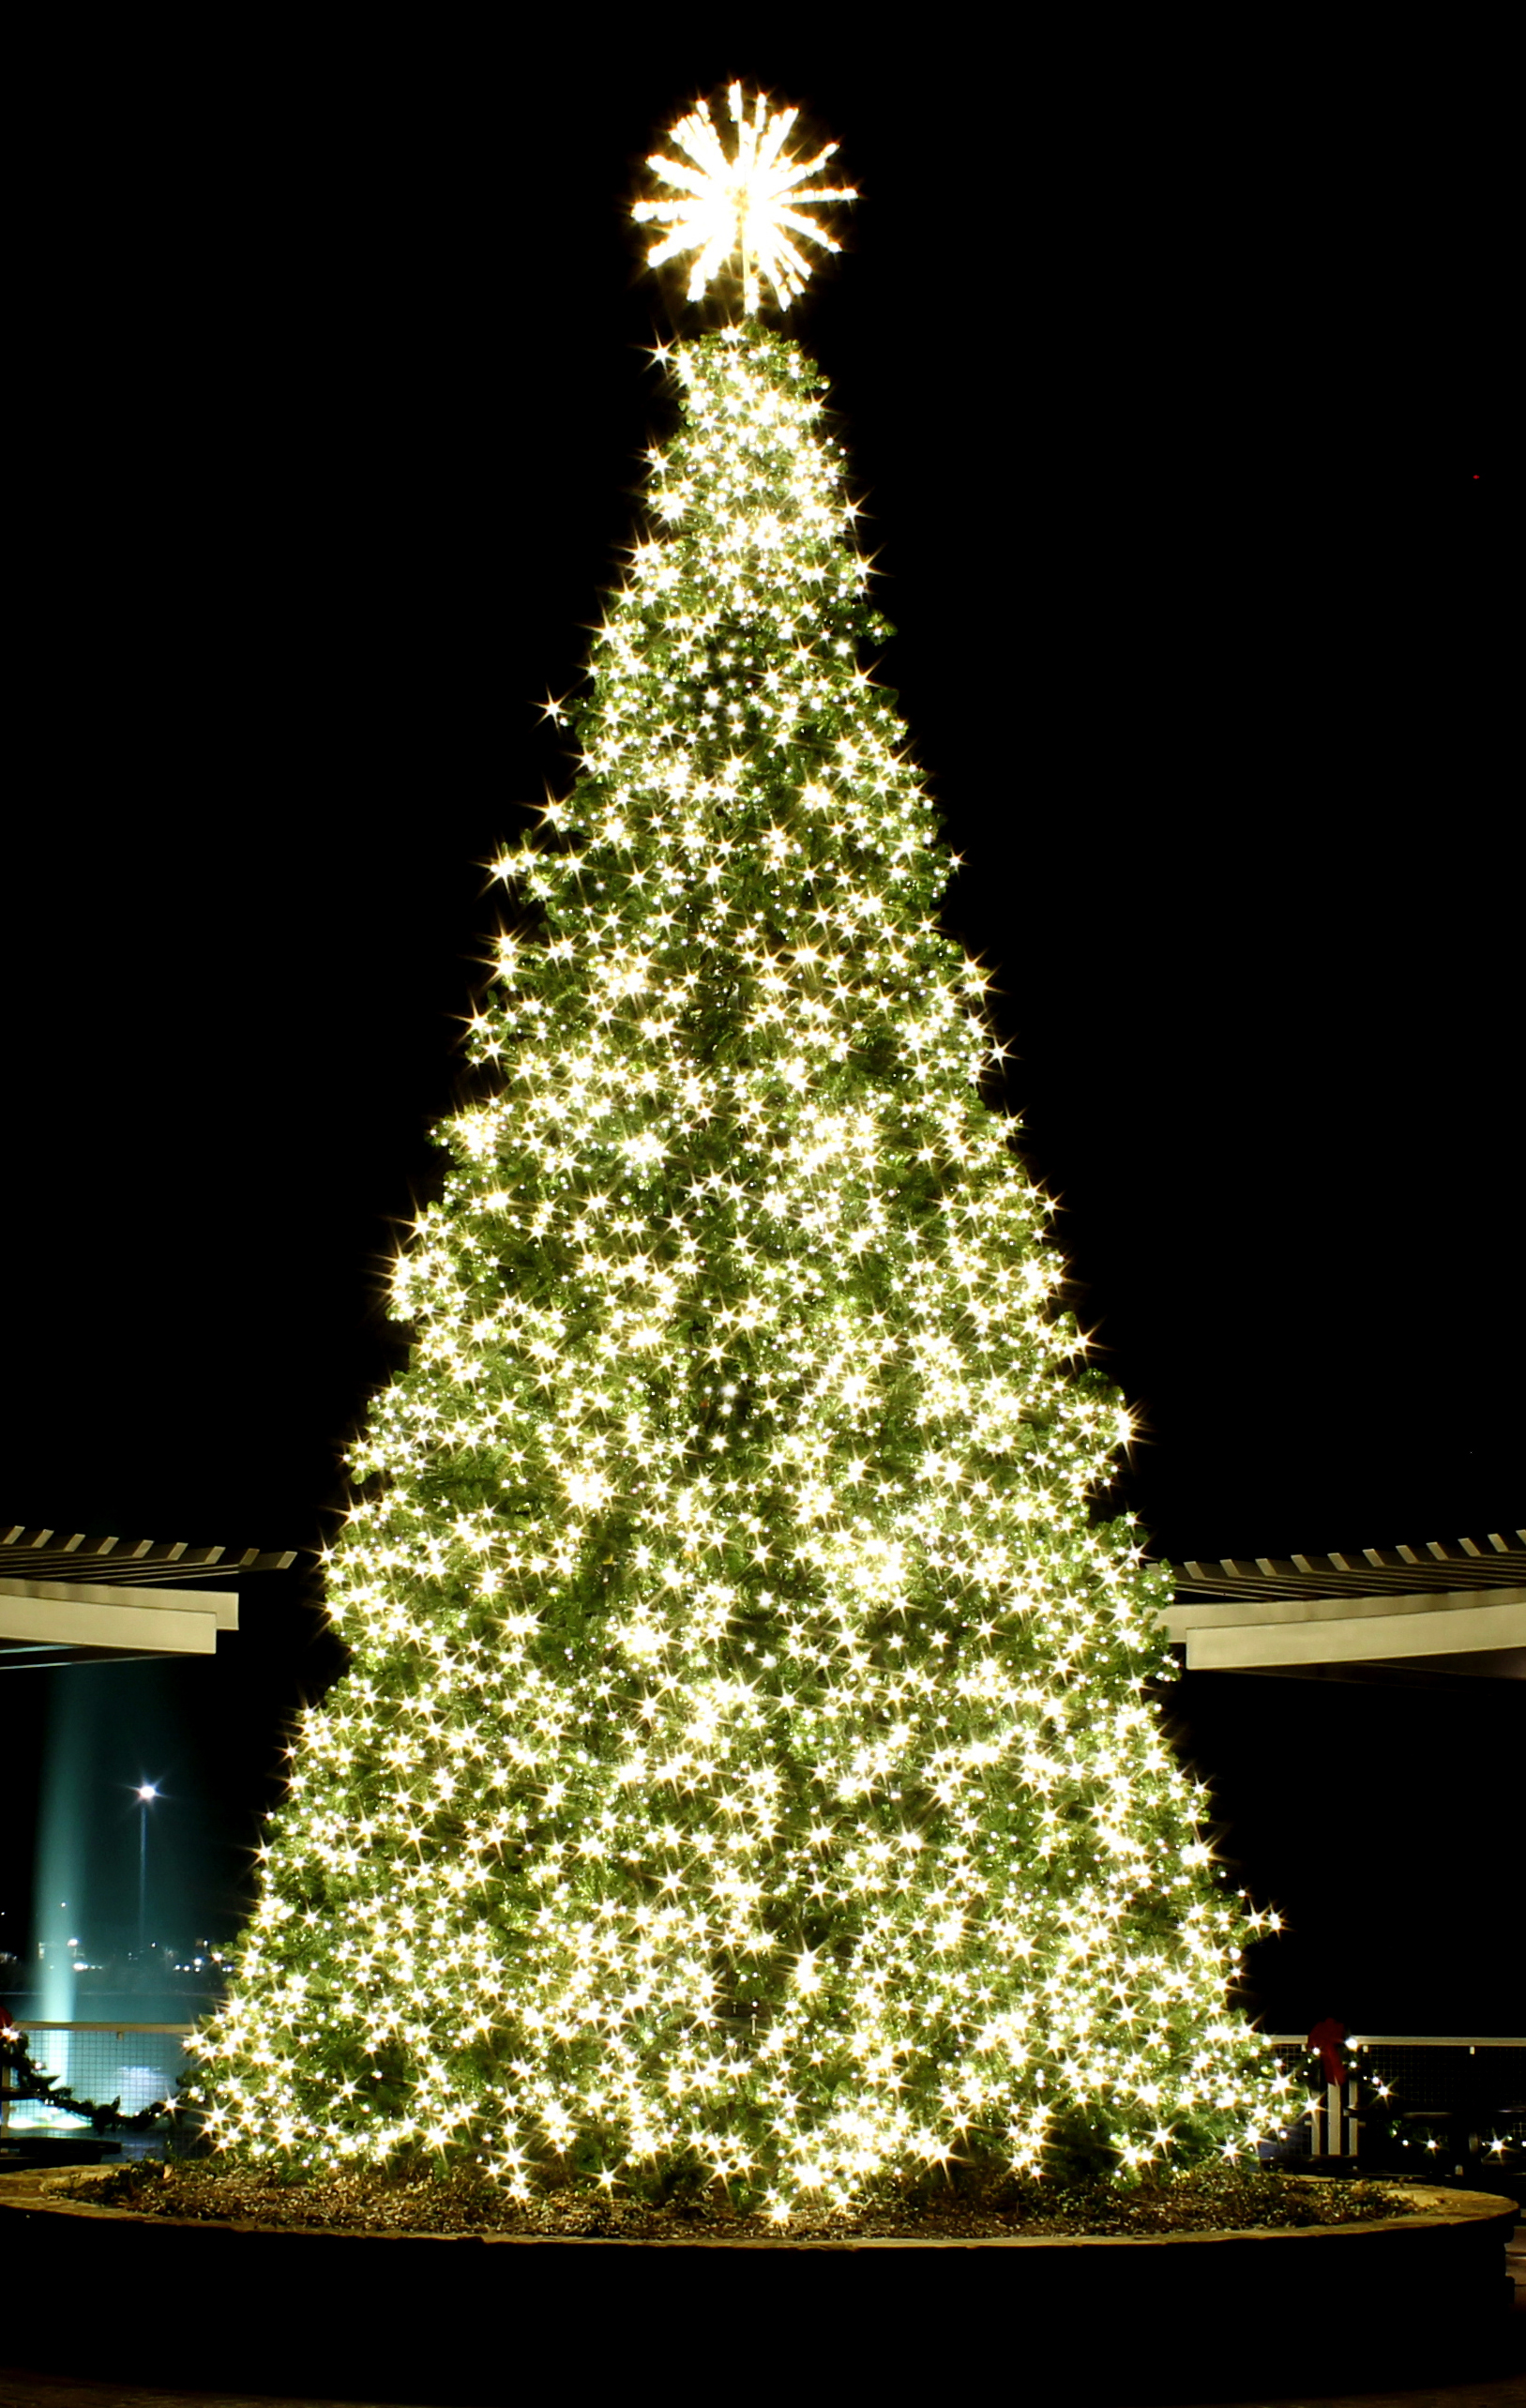 A 19-foot Christmas Tree will be at the head of the Wharf.